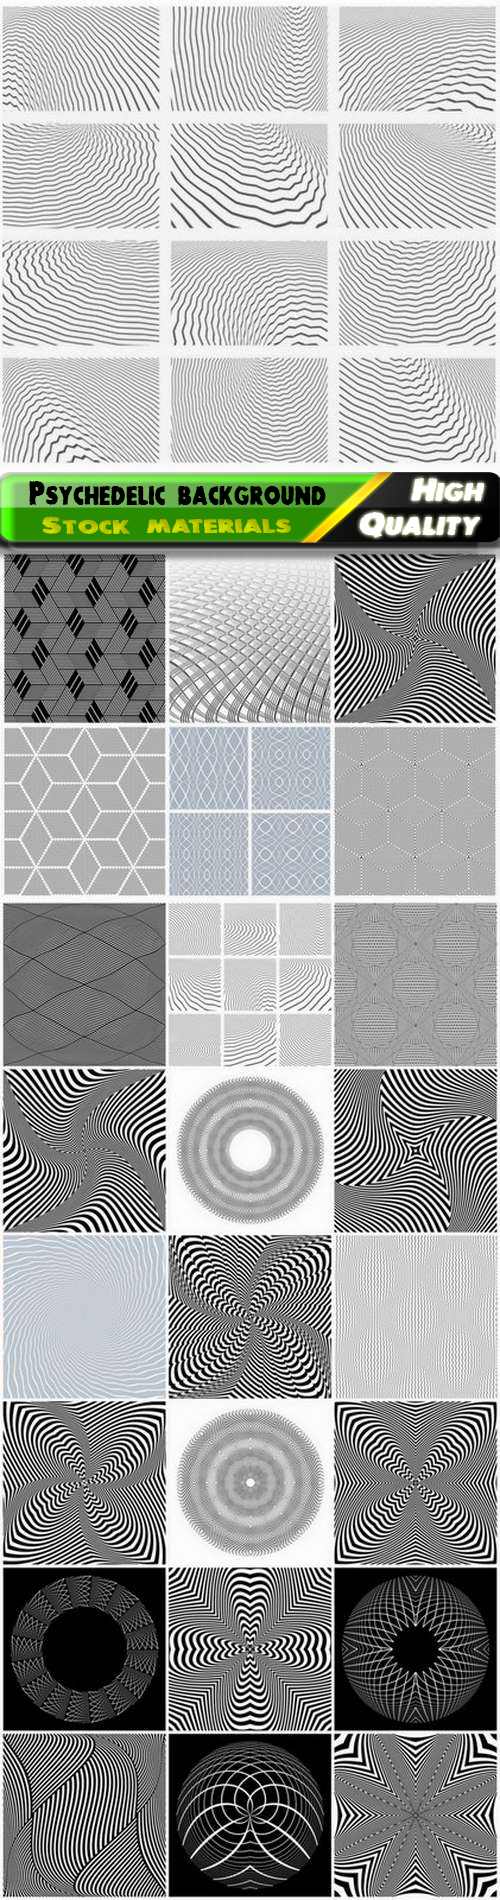 Abstract linear psychedelic background with optical illusion 25 Eps